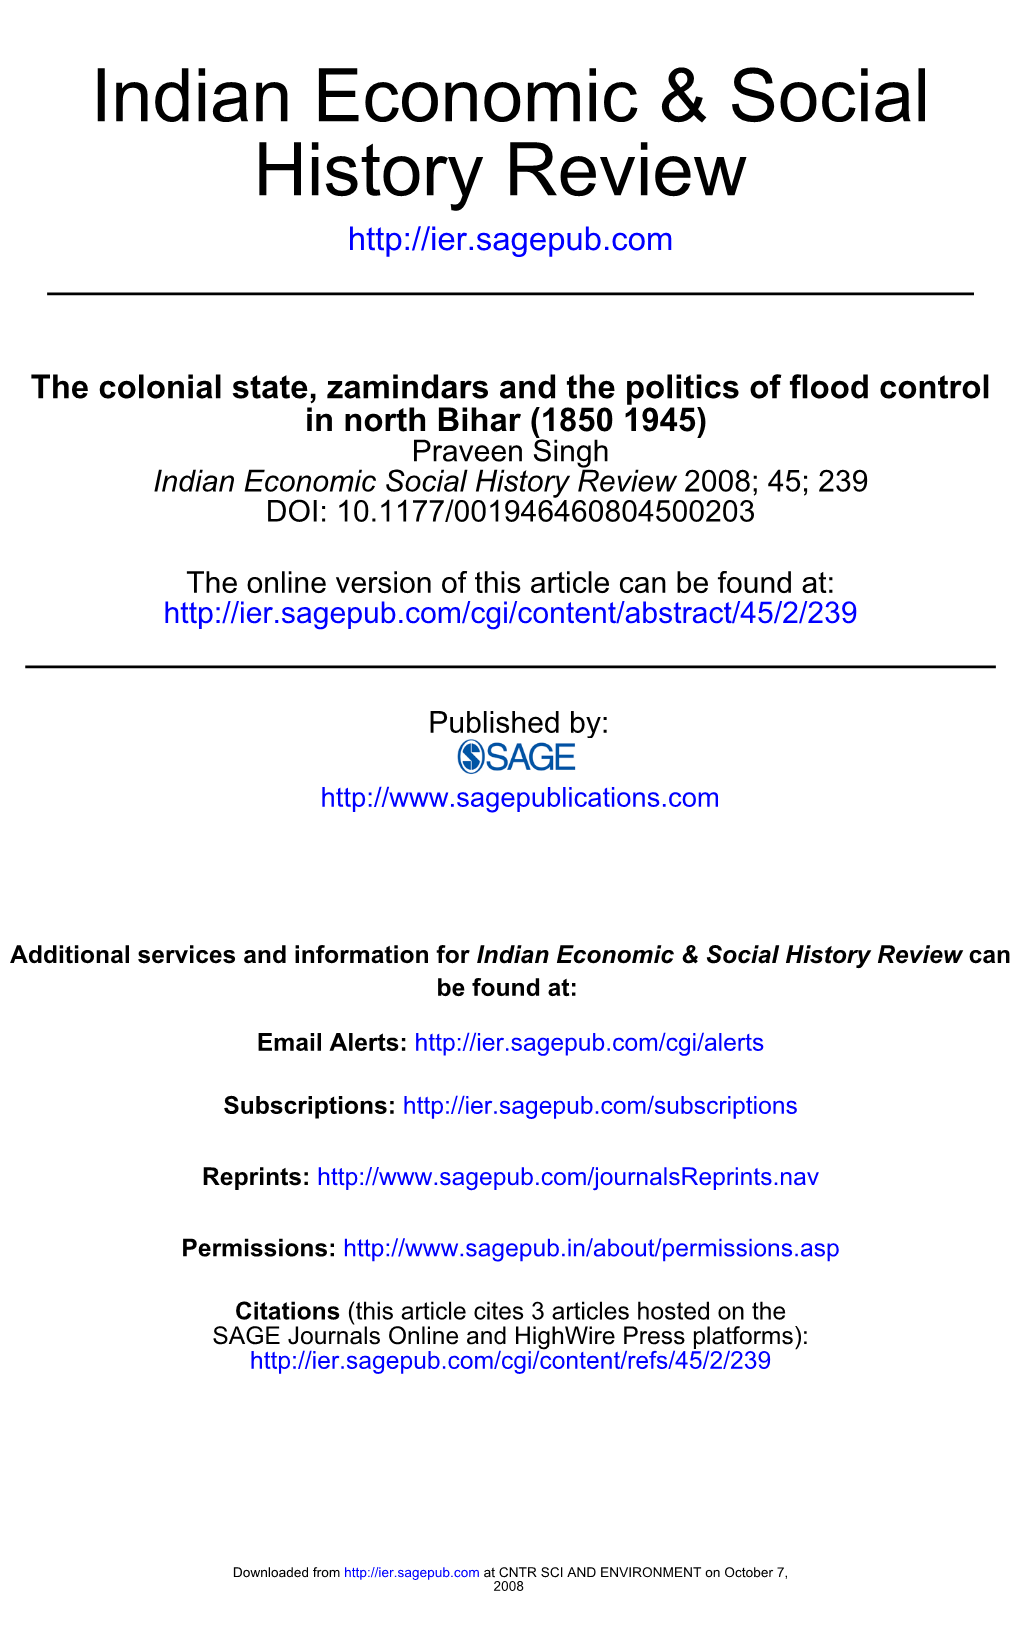 The Colonial State, Zamindars and the Politics of Flood Control in North Bihar